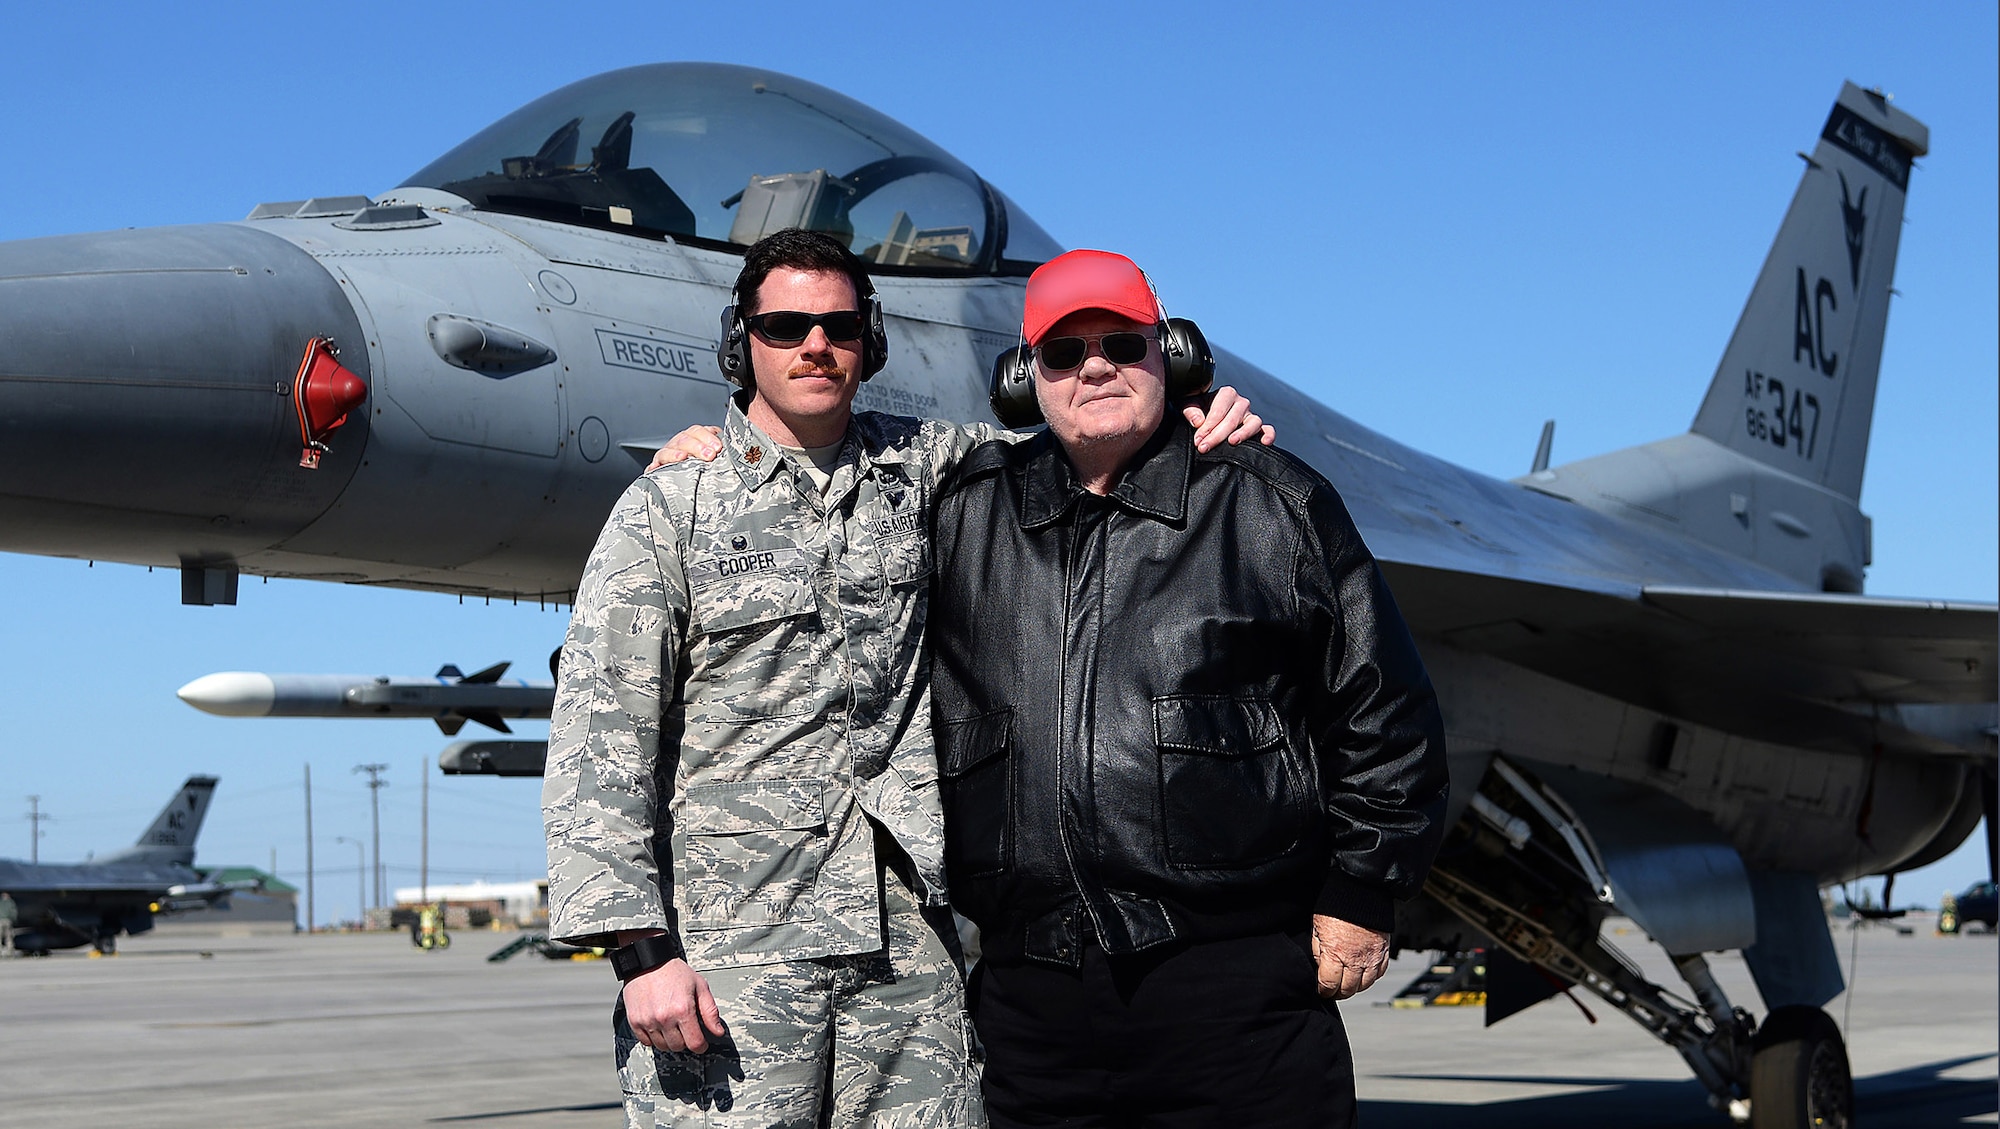 A picture of Maj. Brian T. Cooper, commander of the 177th Fighter Wing Aircraft Maintenance Squadron, New Jersey Air National Guard, and Thomas J. Cooper, a retired Air Force captain, posing for a photo in front of a U.S. Air Force F-16C Fighting Falcon.